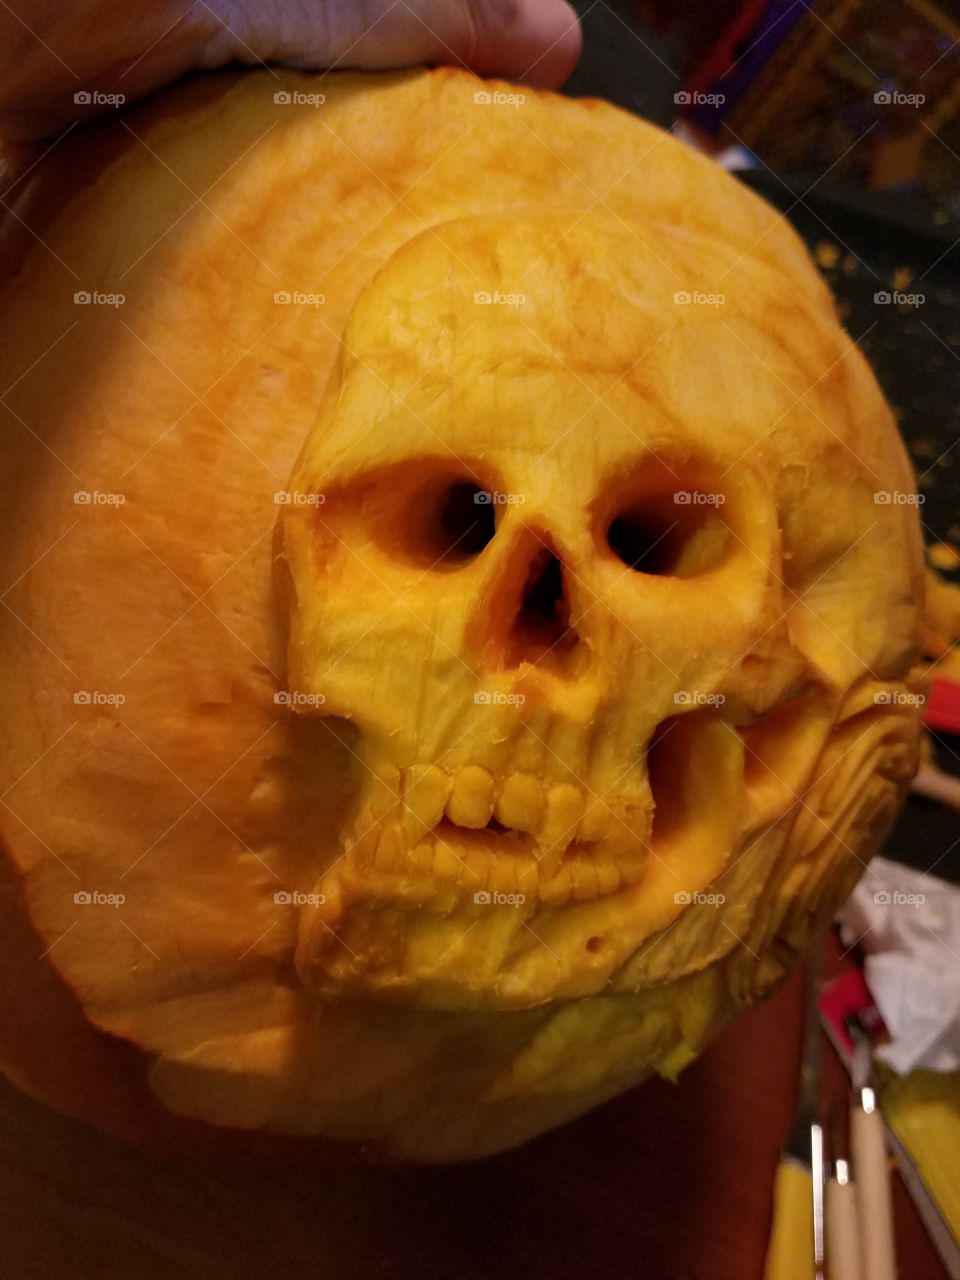 Picture of the skull, looking directly into it's eyes & nose, during the extreme pumpkin carving process...